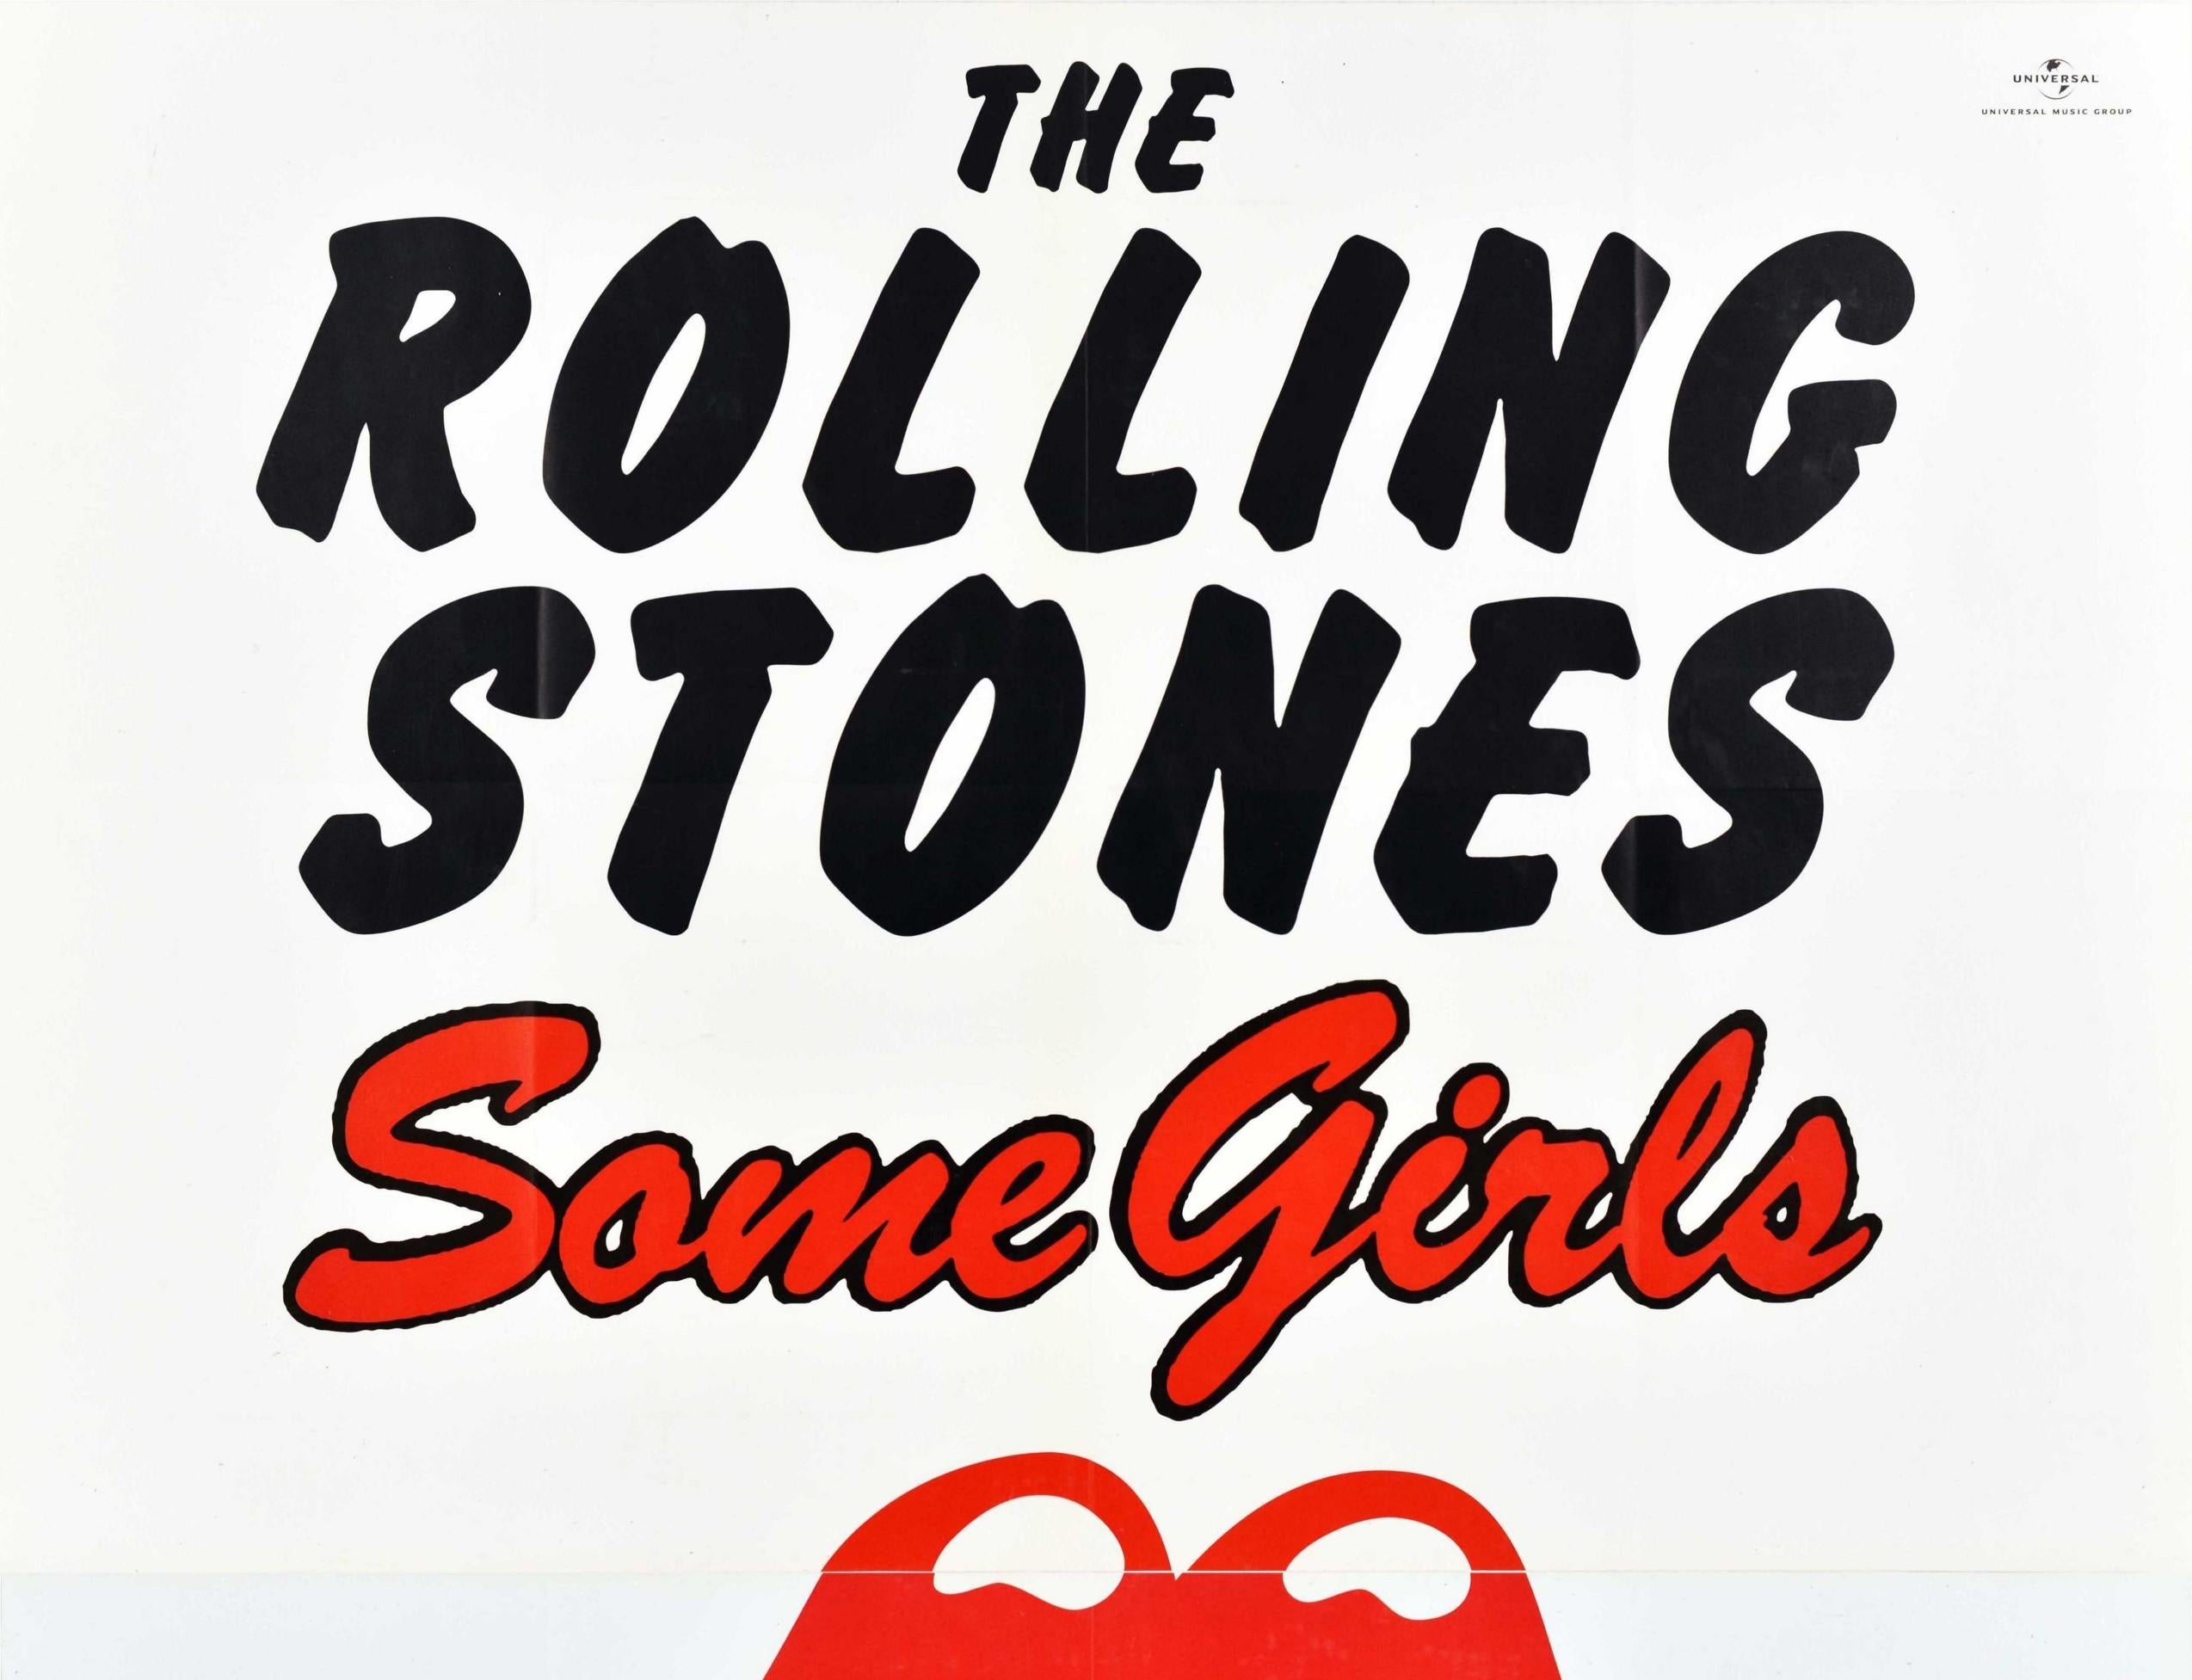 Original music advertising poster for The Rolling Stones Some Girls studio album double CD featuring the iconic tongue and lips logo (aka Hot Lips logo) designed by the English art designer John Pasche in 1970, the title text in bold black and red